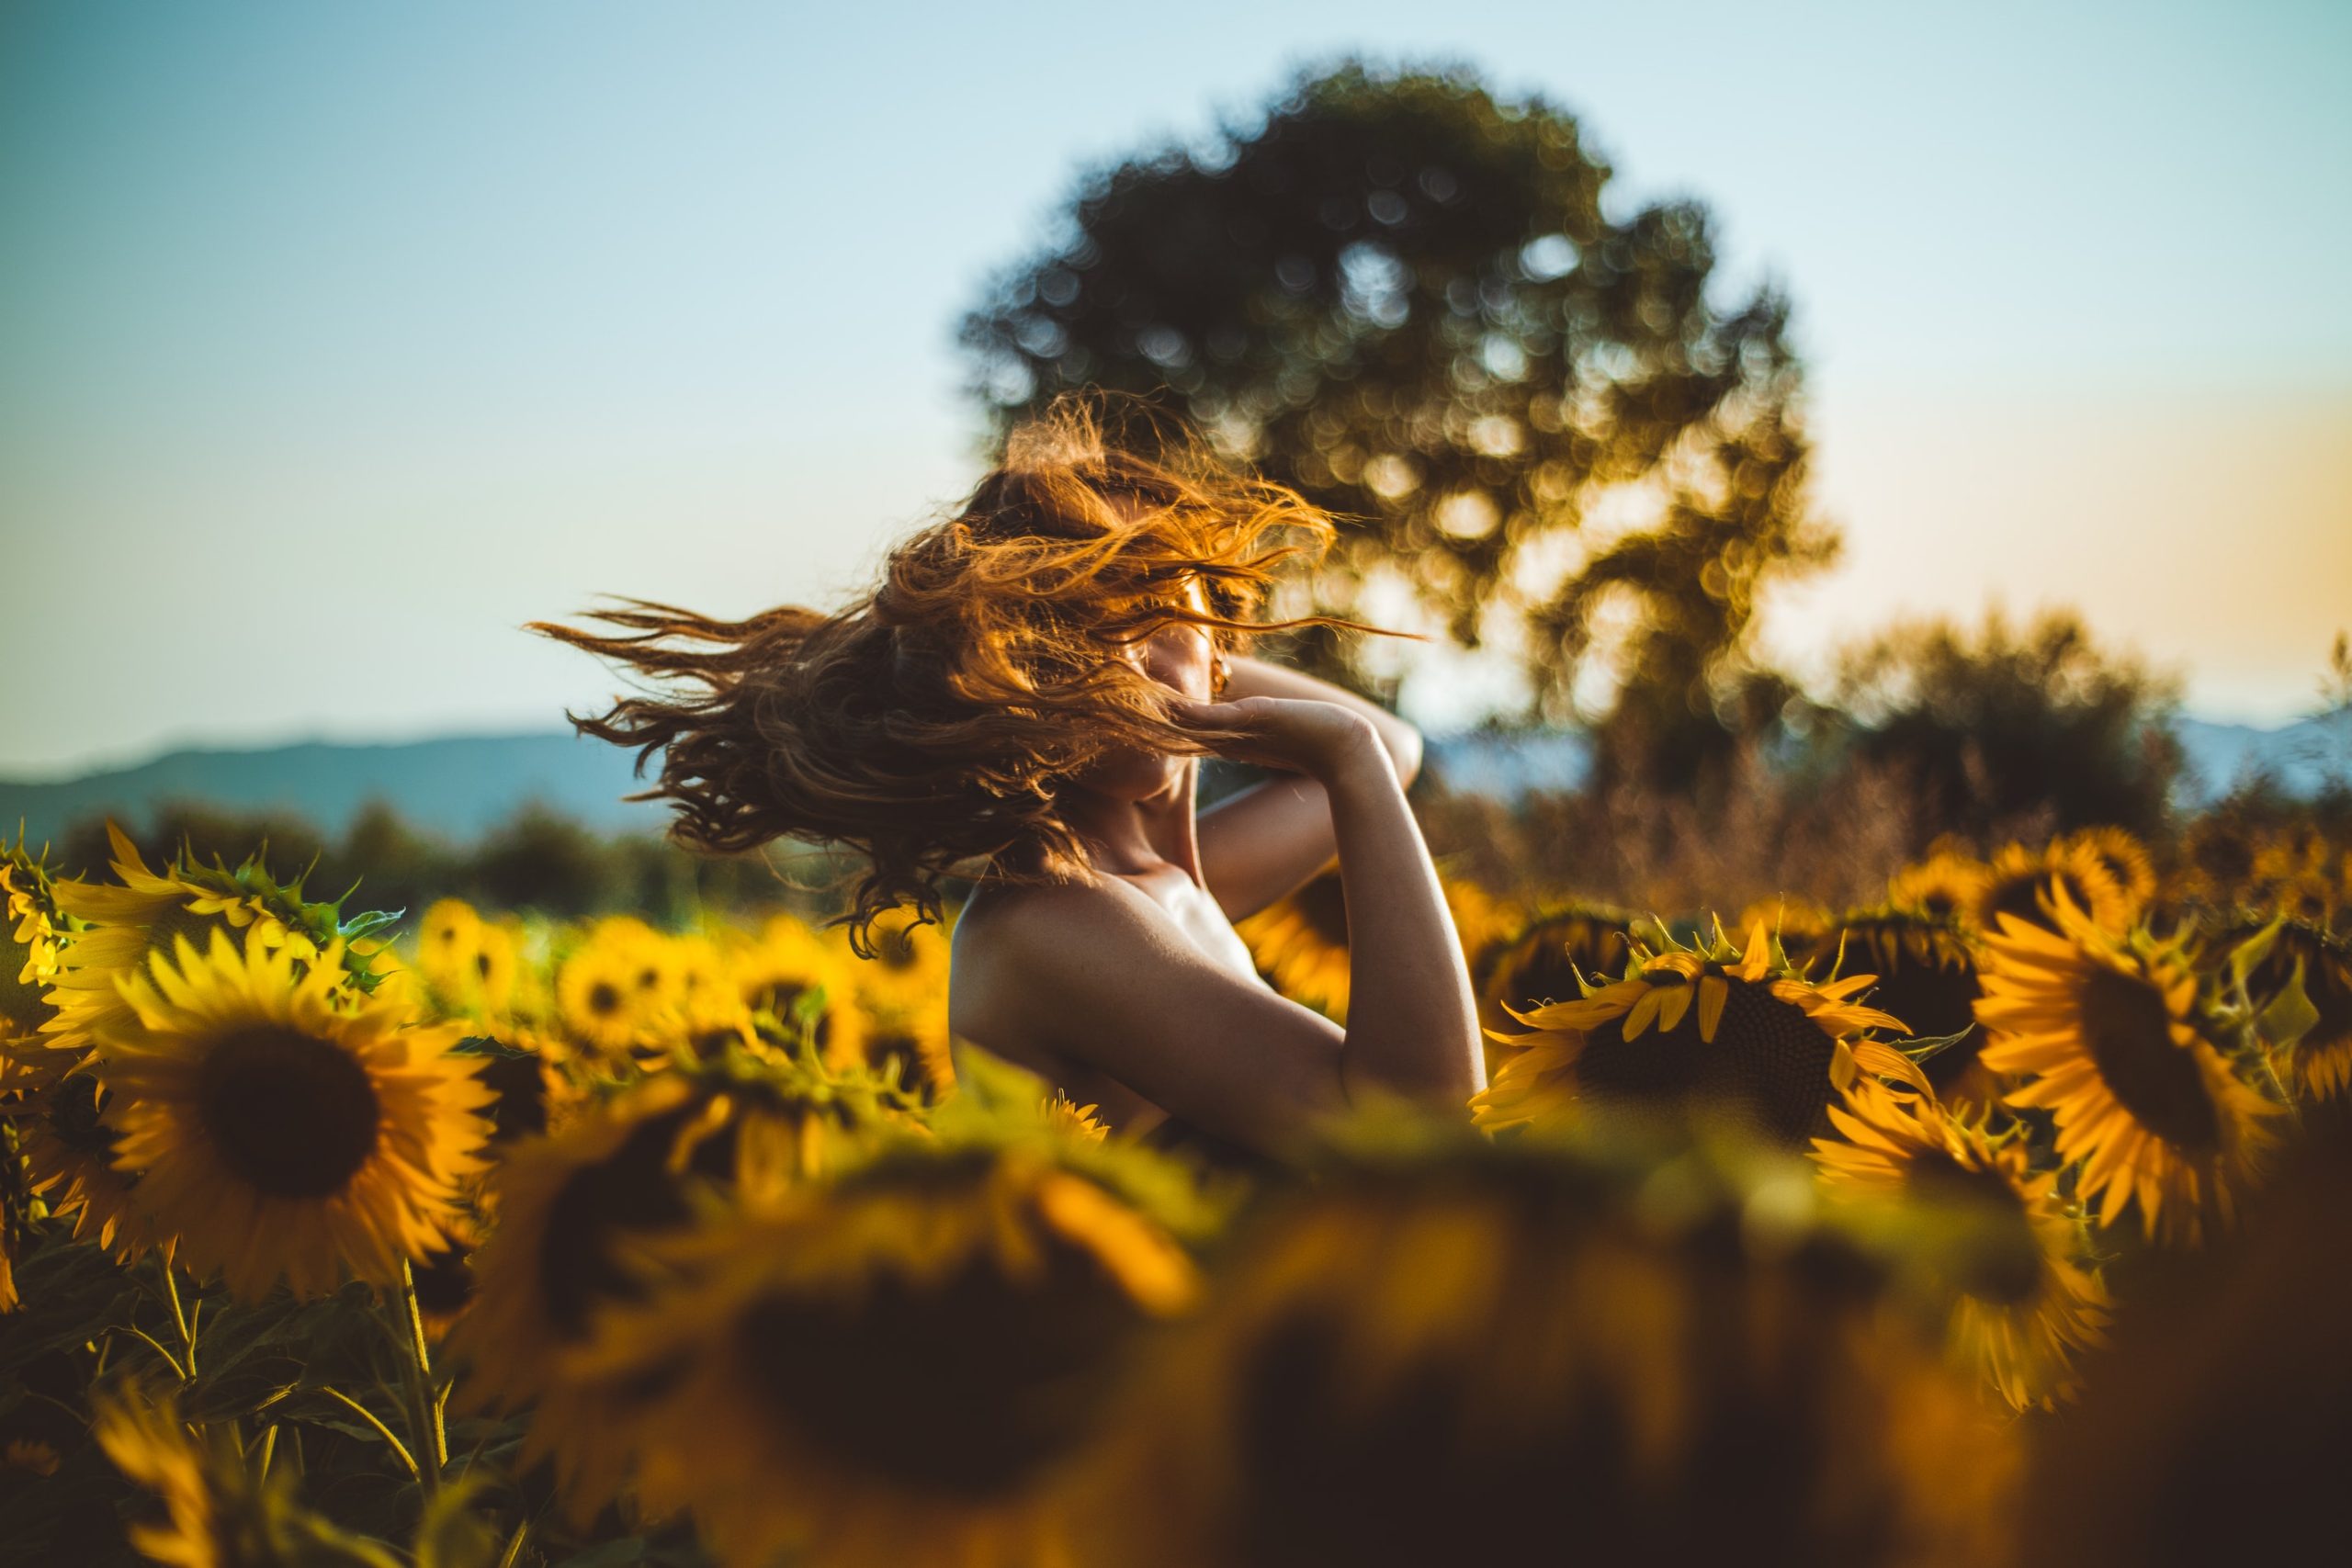 Sunflower Picture Ideas To Take This Fall